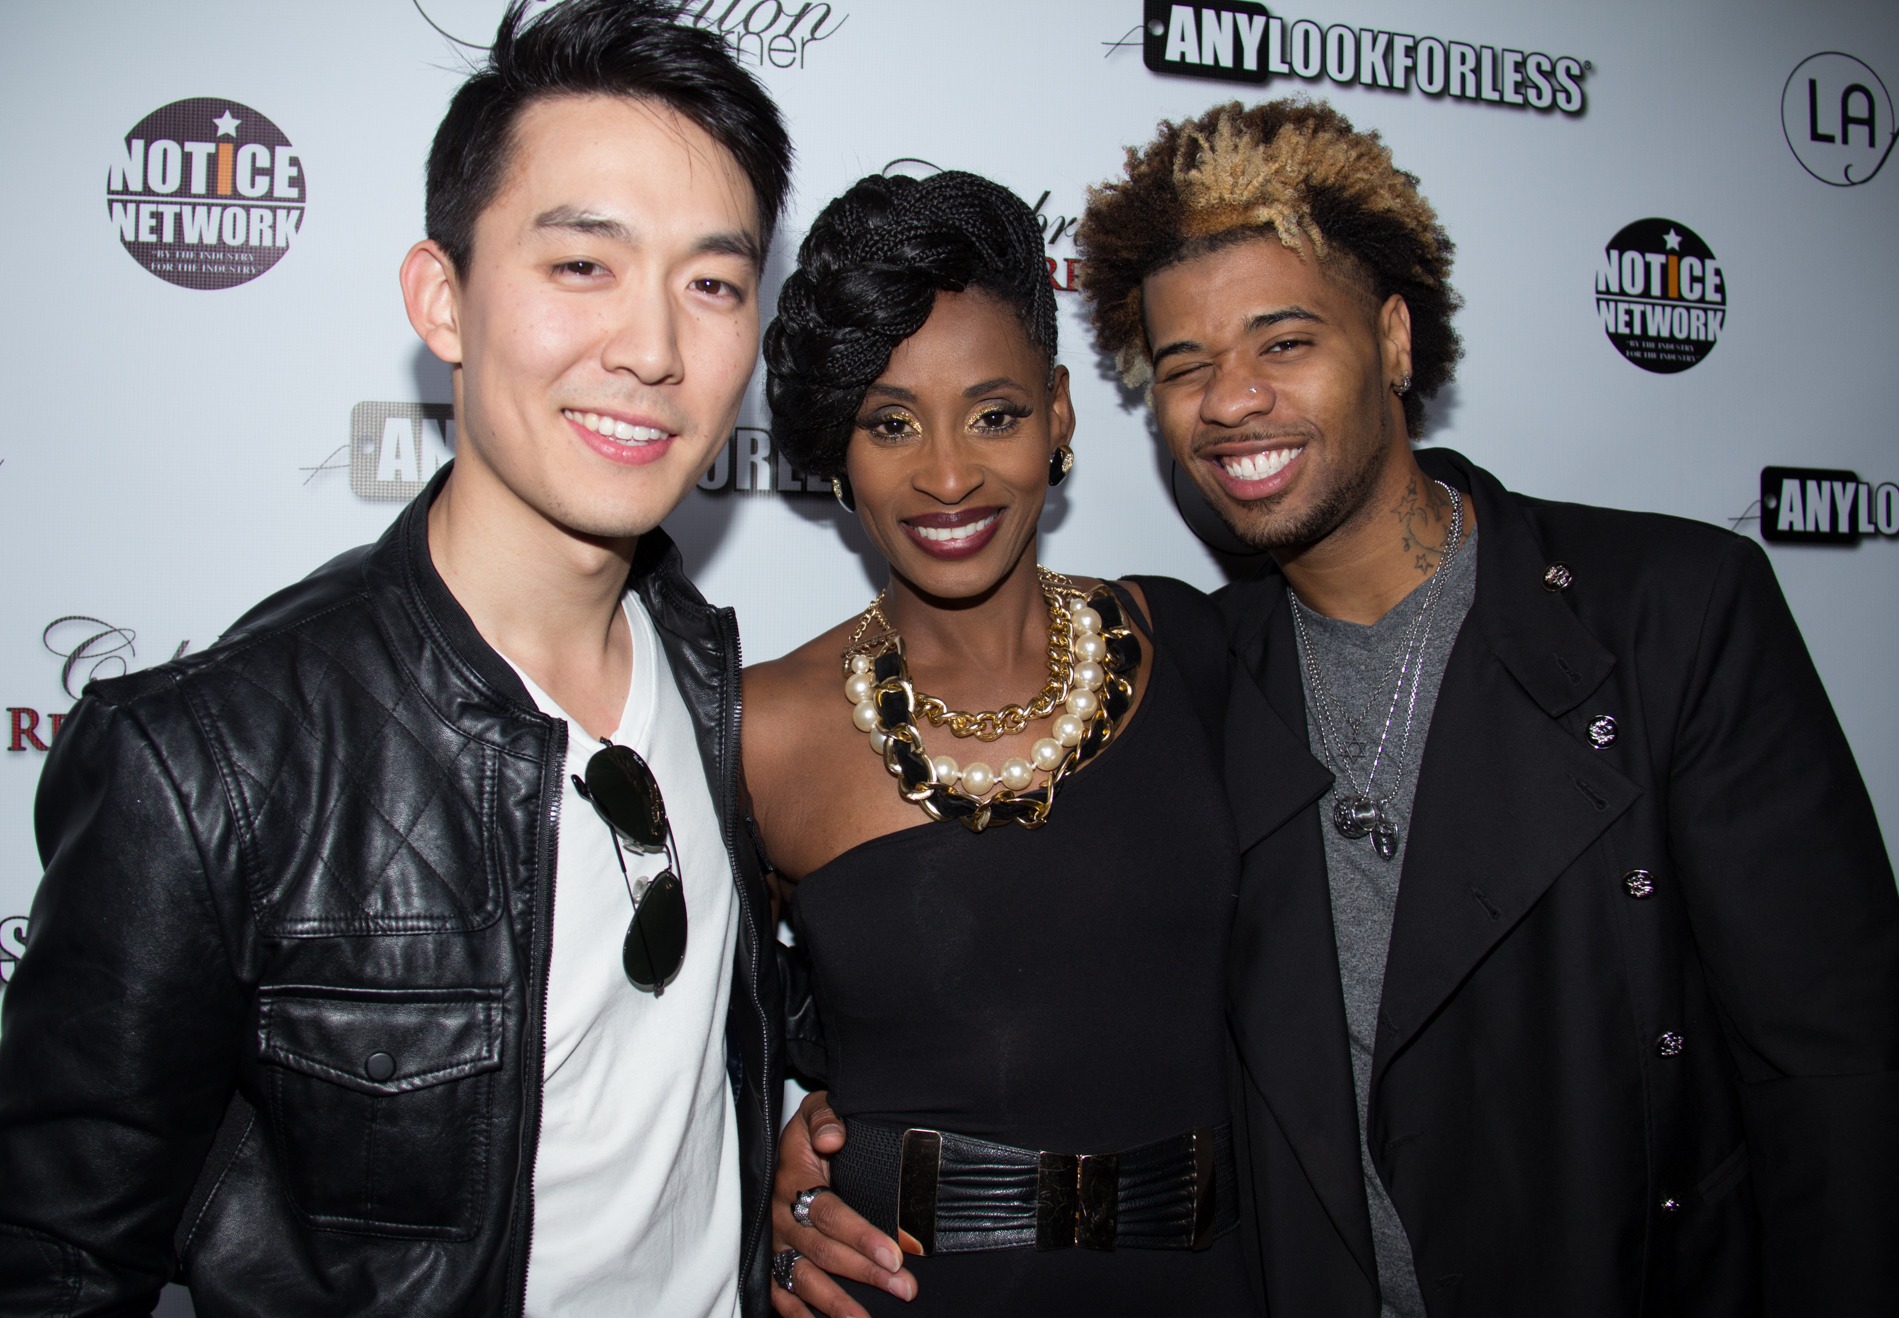 Dior C. Choi, Latricia Renee Price, Cori Sims (from left to right) at the event of American Music Awards VIP Afterparty Sofitel (2014)